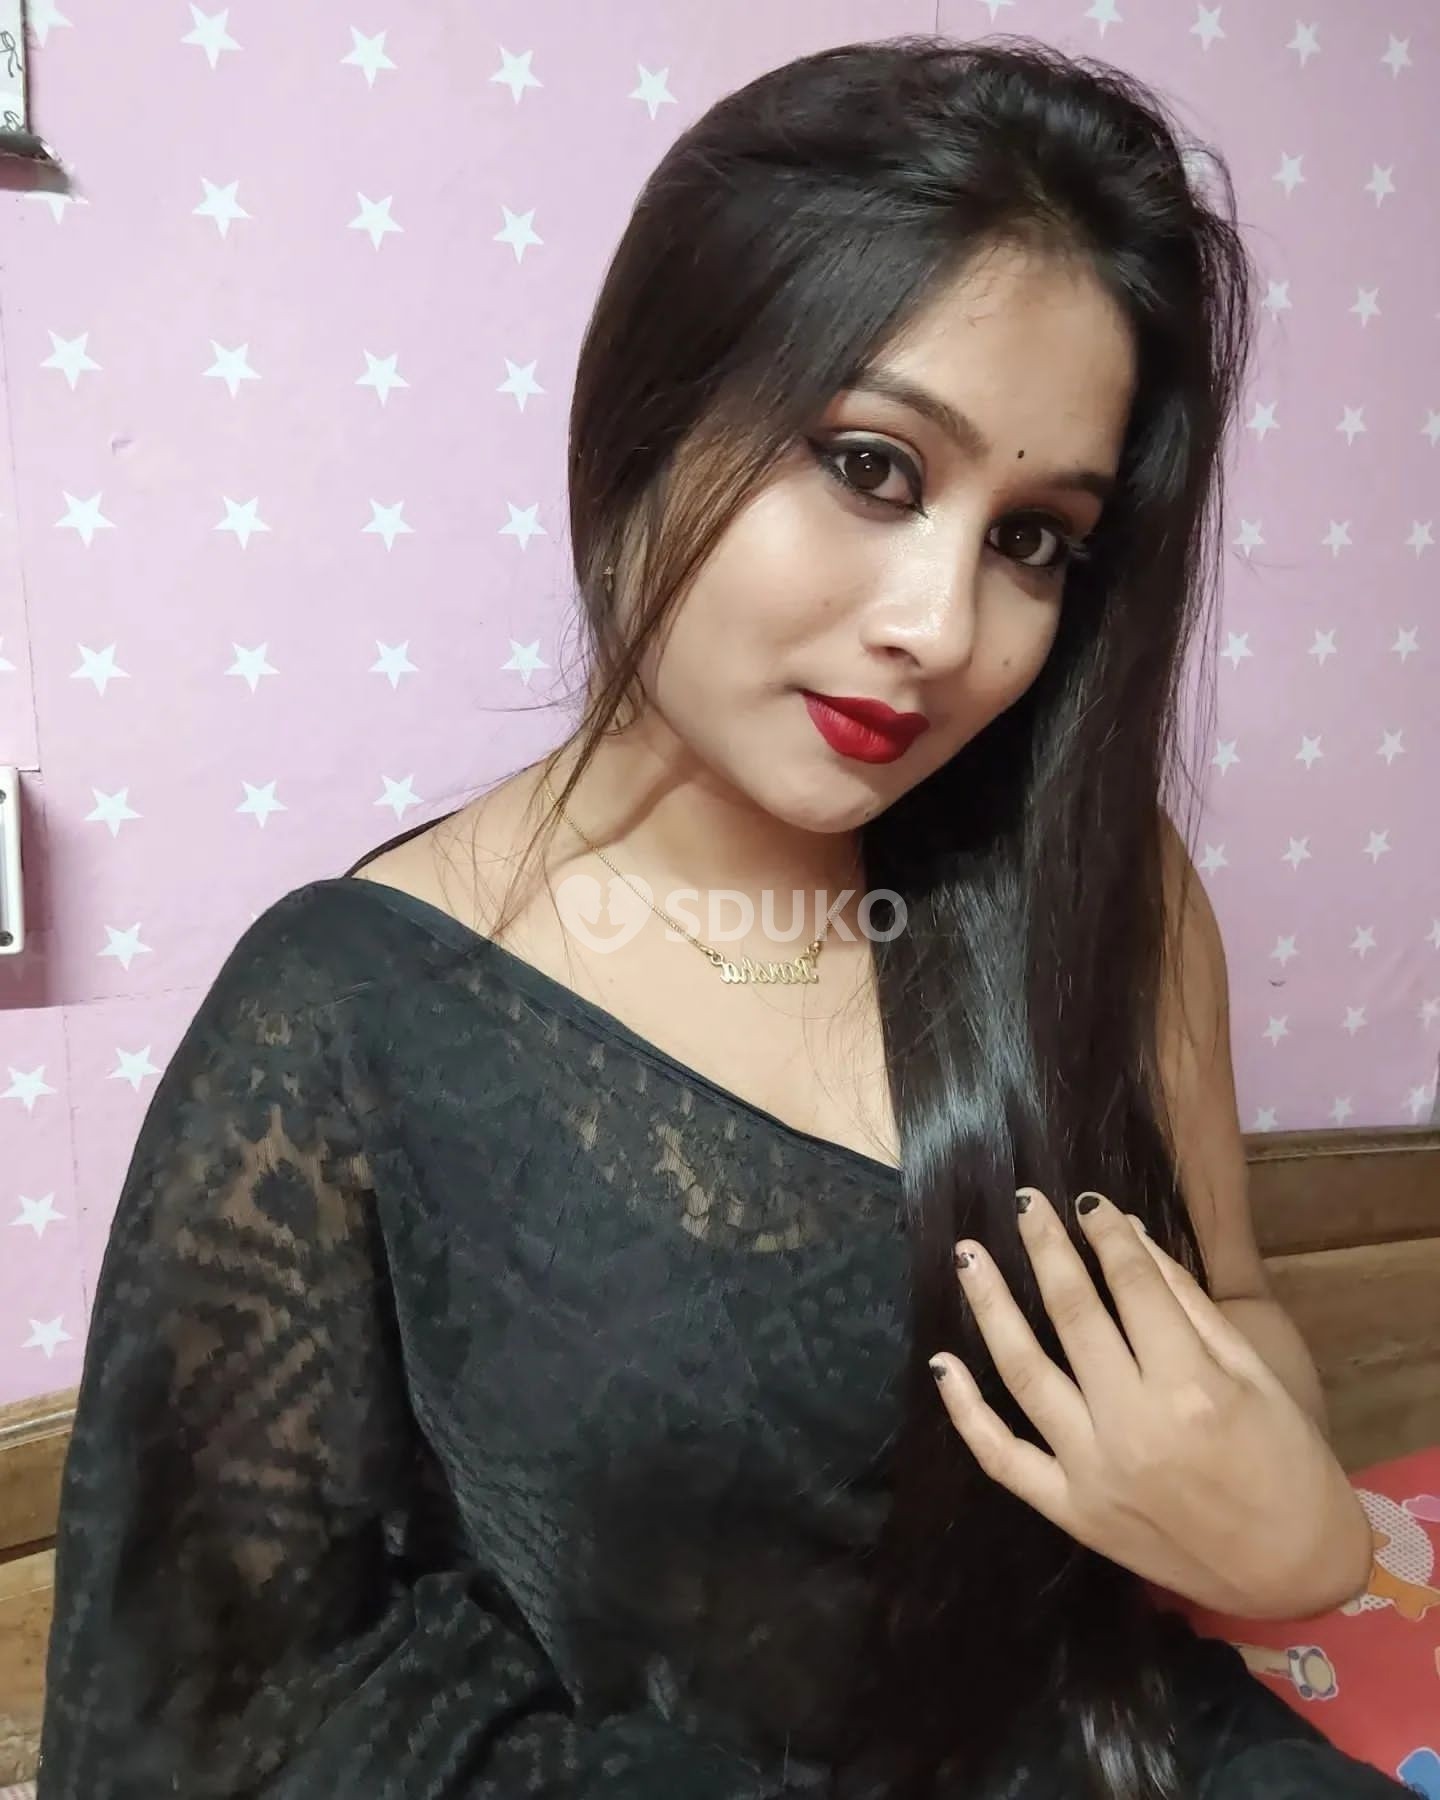 BHILAI √√ DIVYA TODAY LOW PRICE 100% SAFE AND SECURE GENUINE INDEPENDENT COLLEGE GIRLS HOUSEWIFE ANYTIME CALL